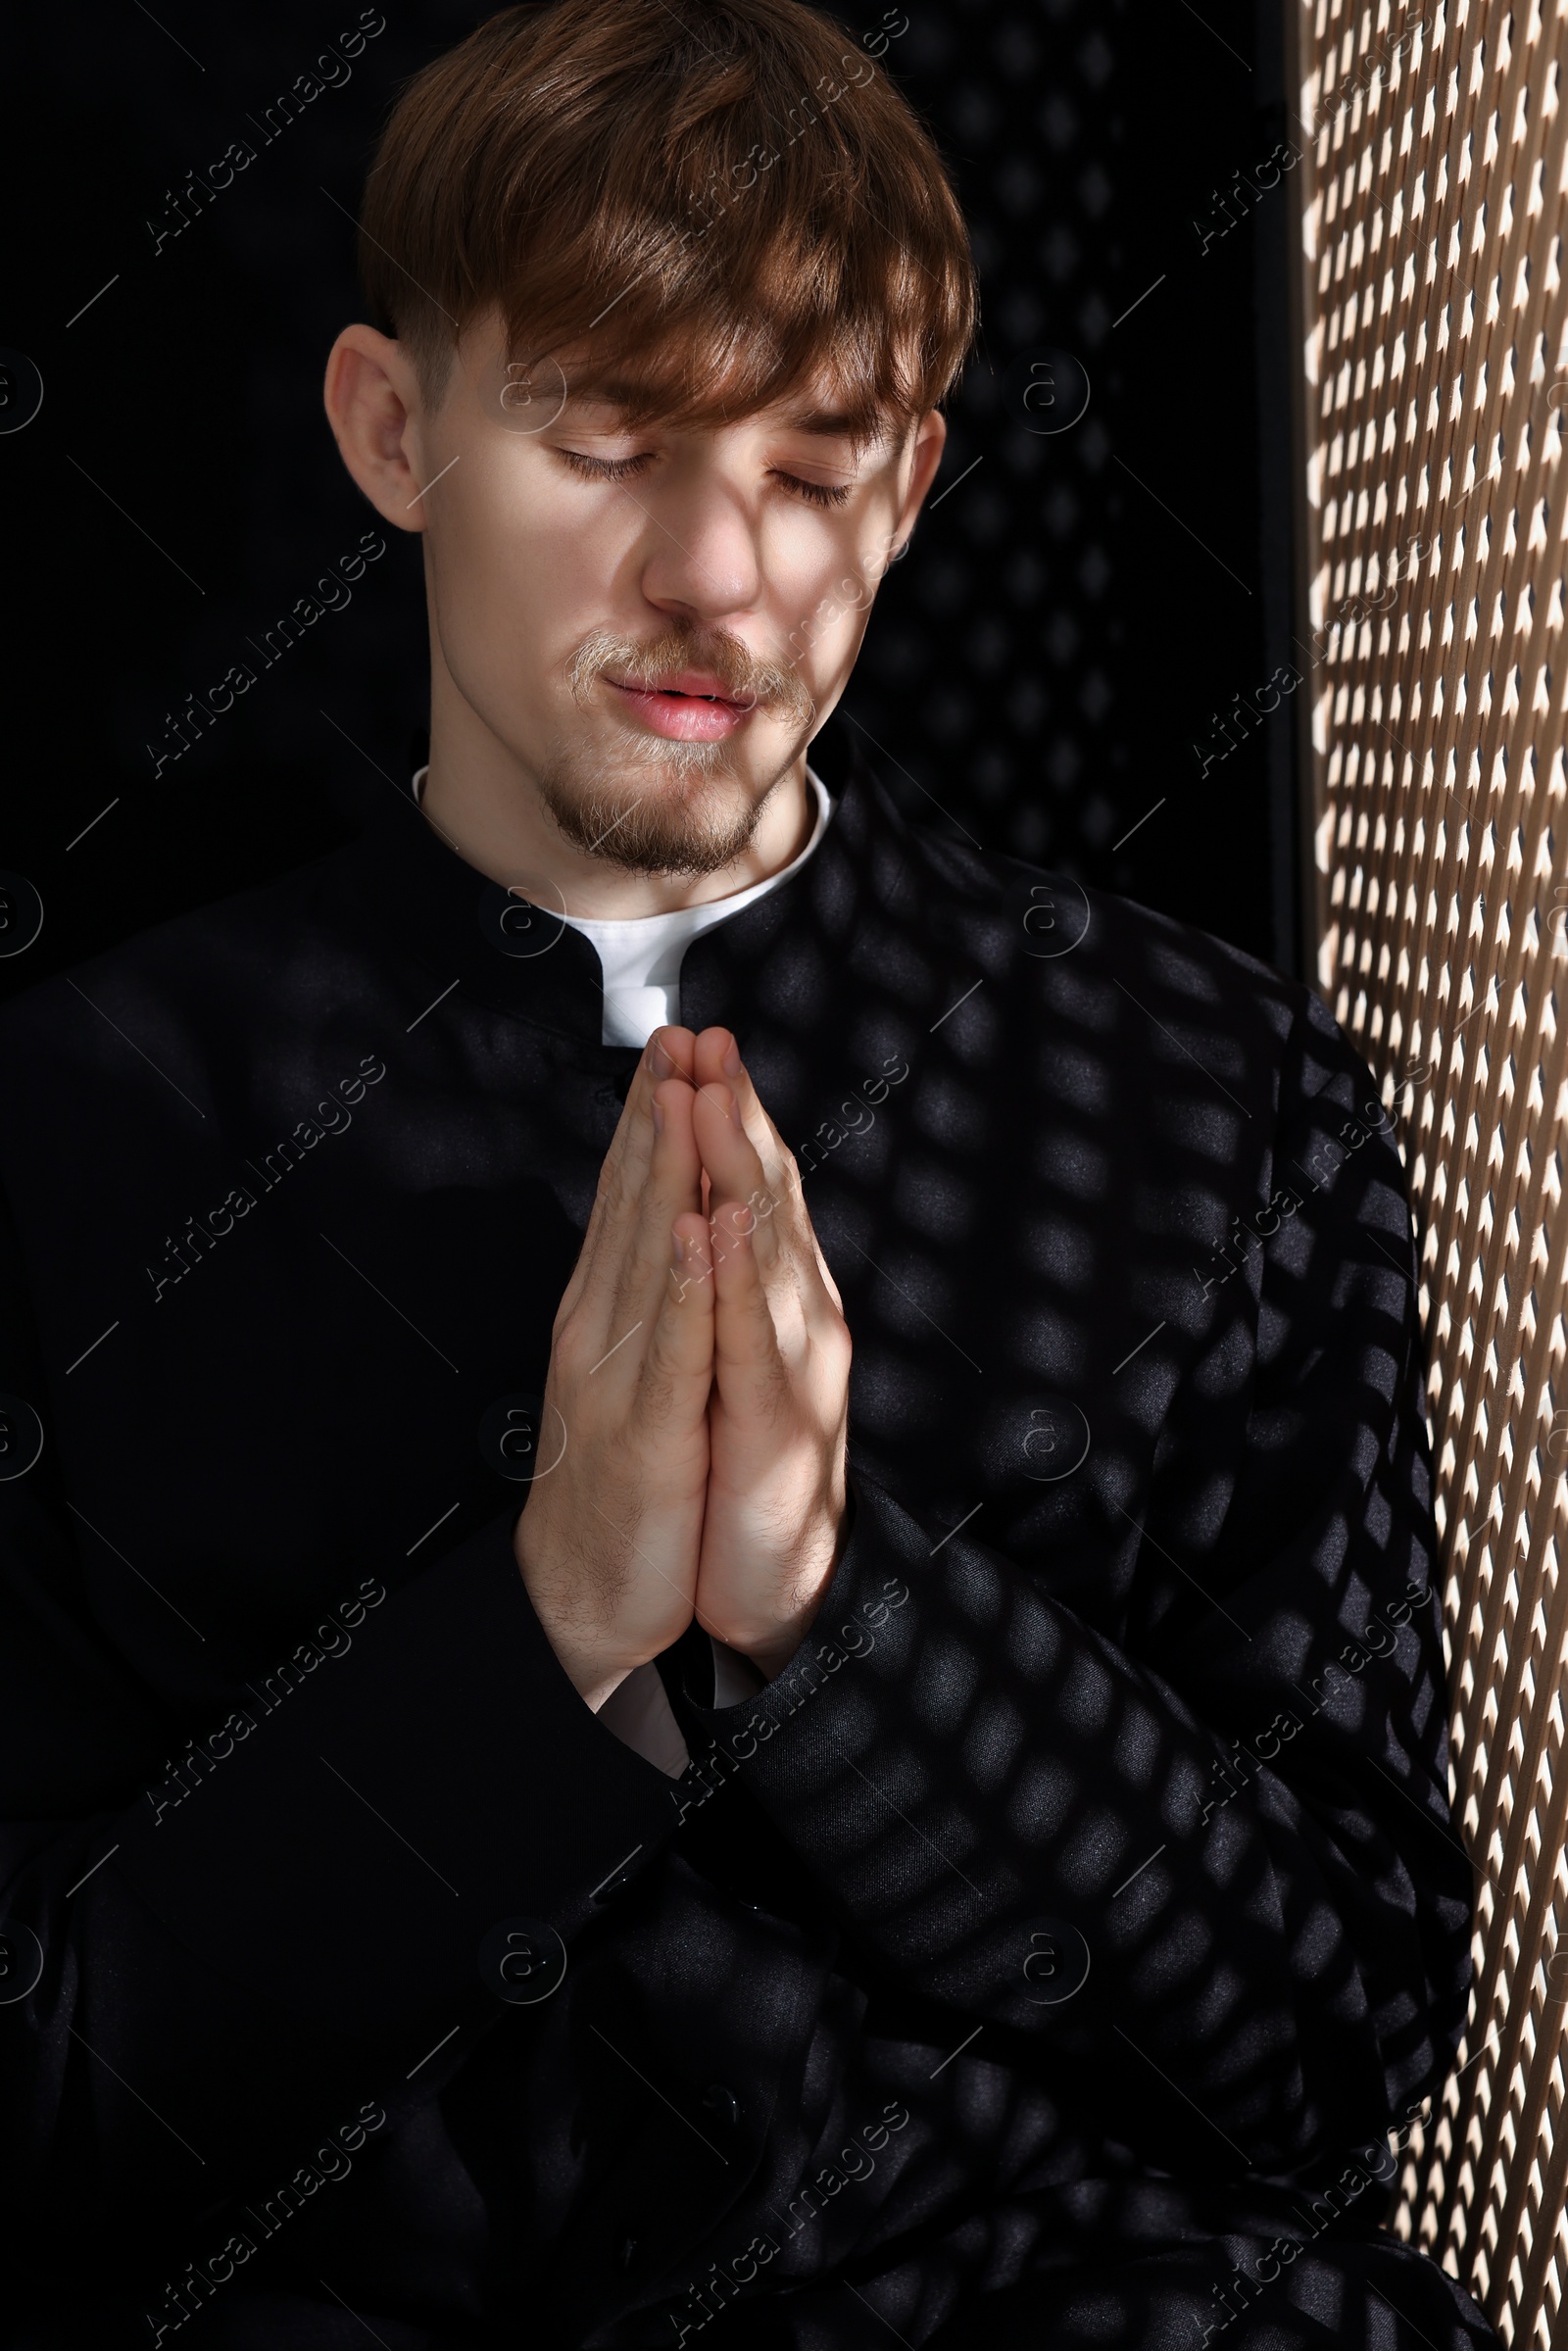 Photo of Catholic priest praying near wooden window in confessional booth